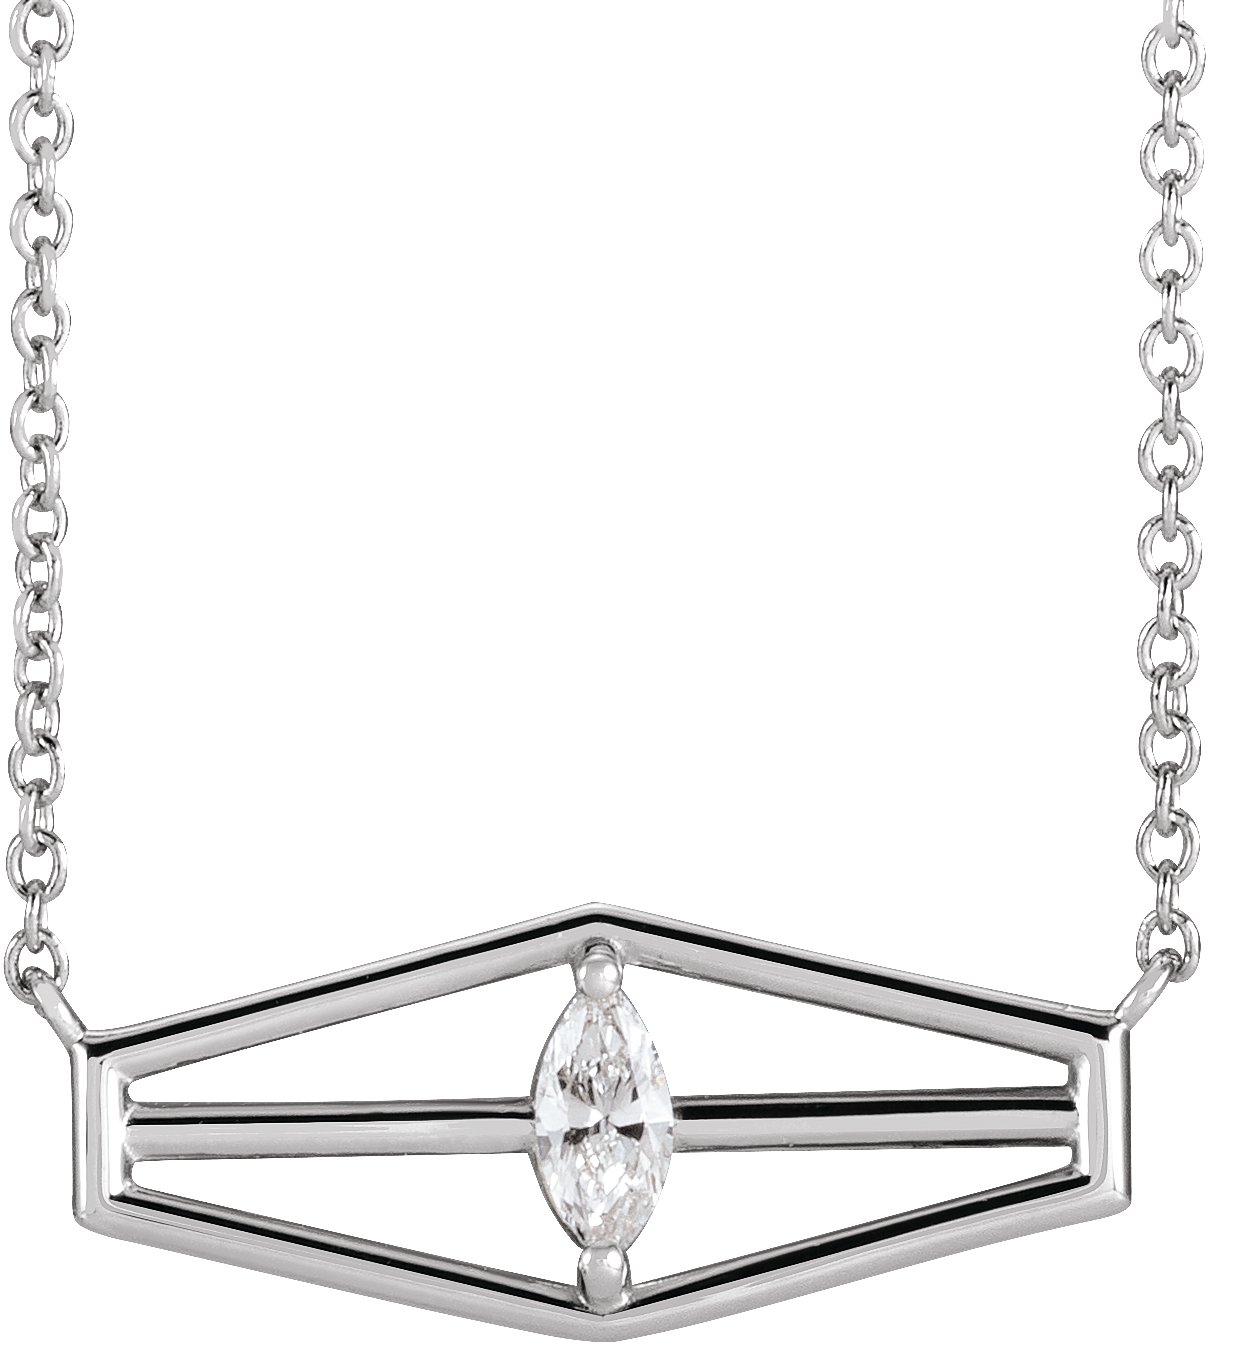 Sterling Silver .167 CT Diamond Geometric 18 inch Necklace Ref. 16628522